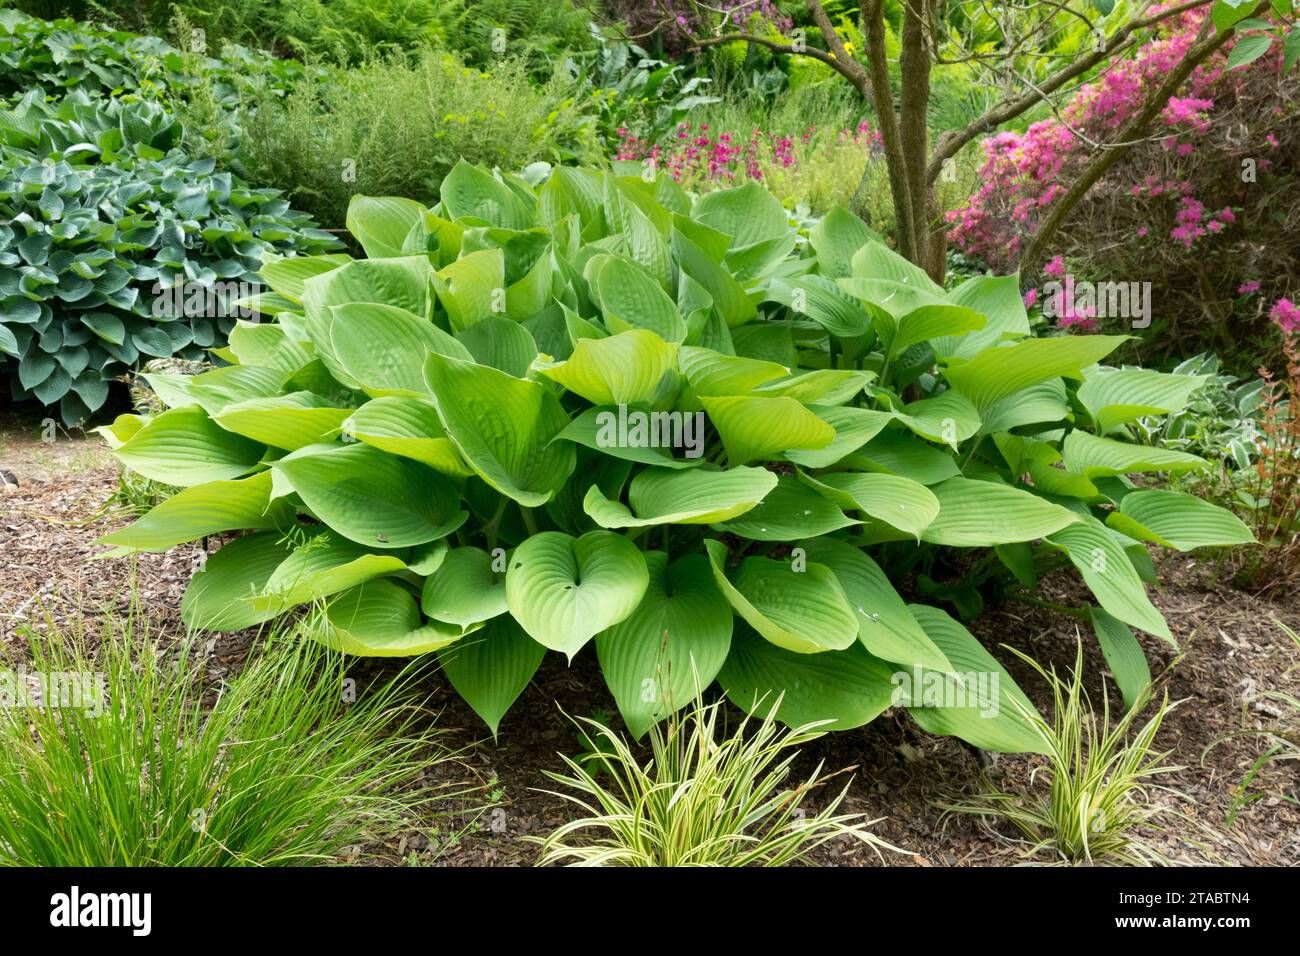 Garden, Hosta "Sum and Substance", Spring, Plantain Lily Foto Stock